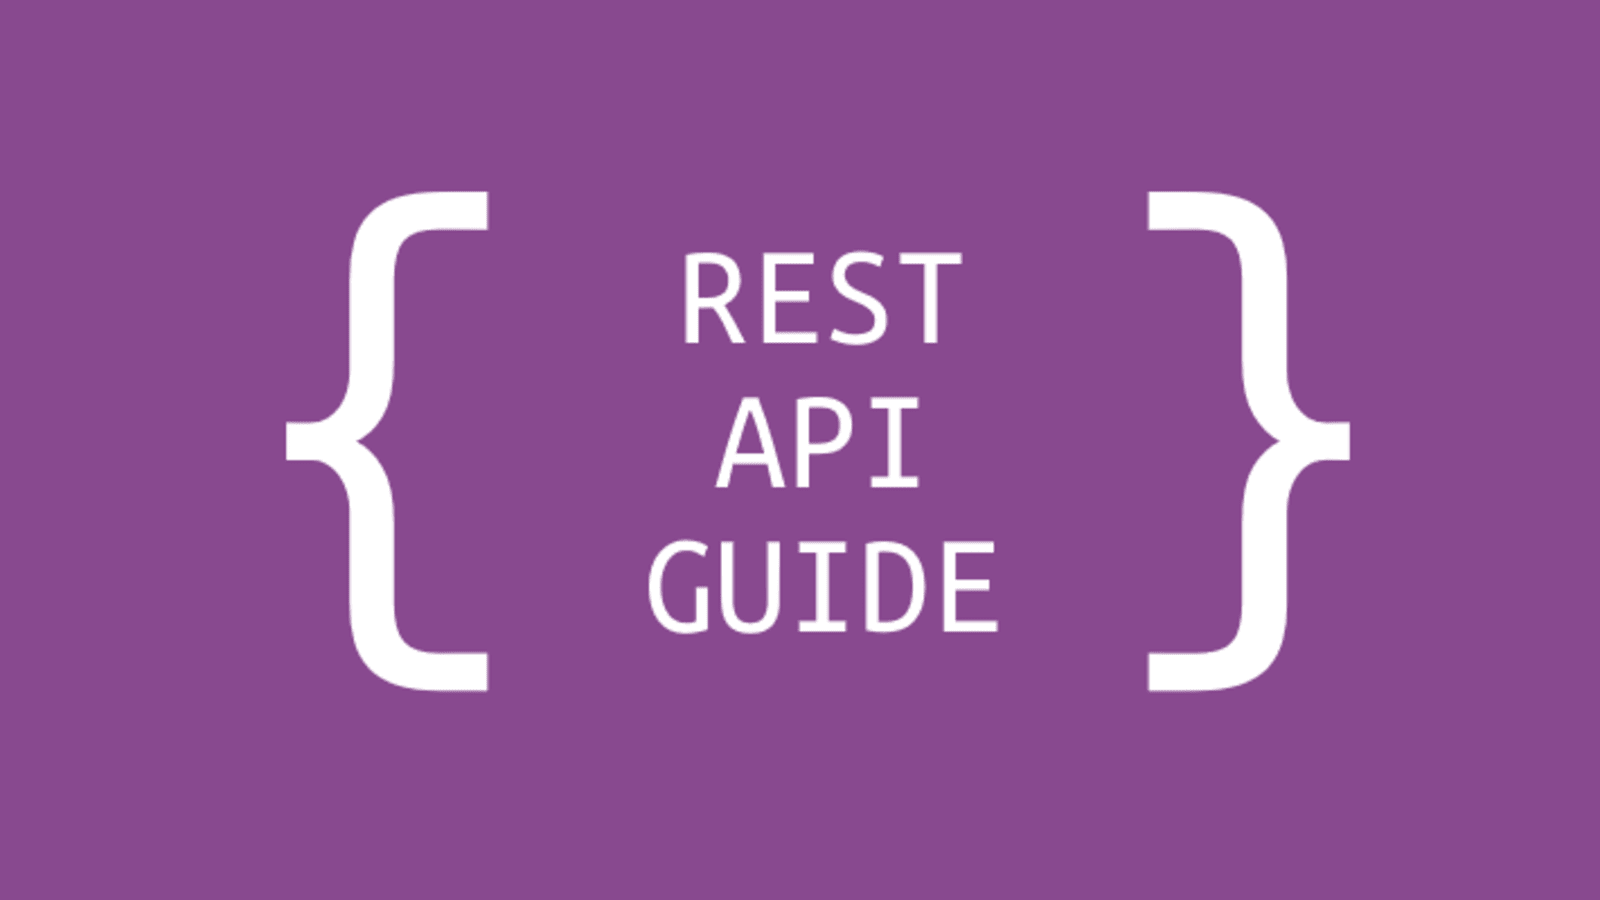 The Most Important Guide on REST API That will make you Pro in APIs Development!